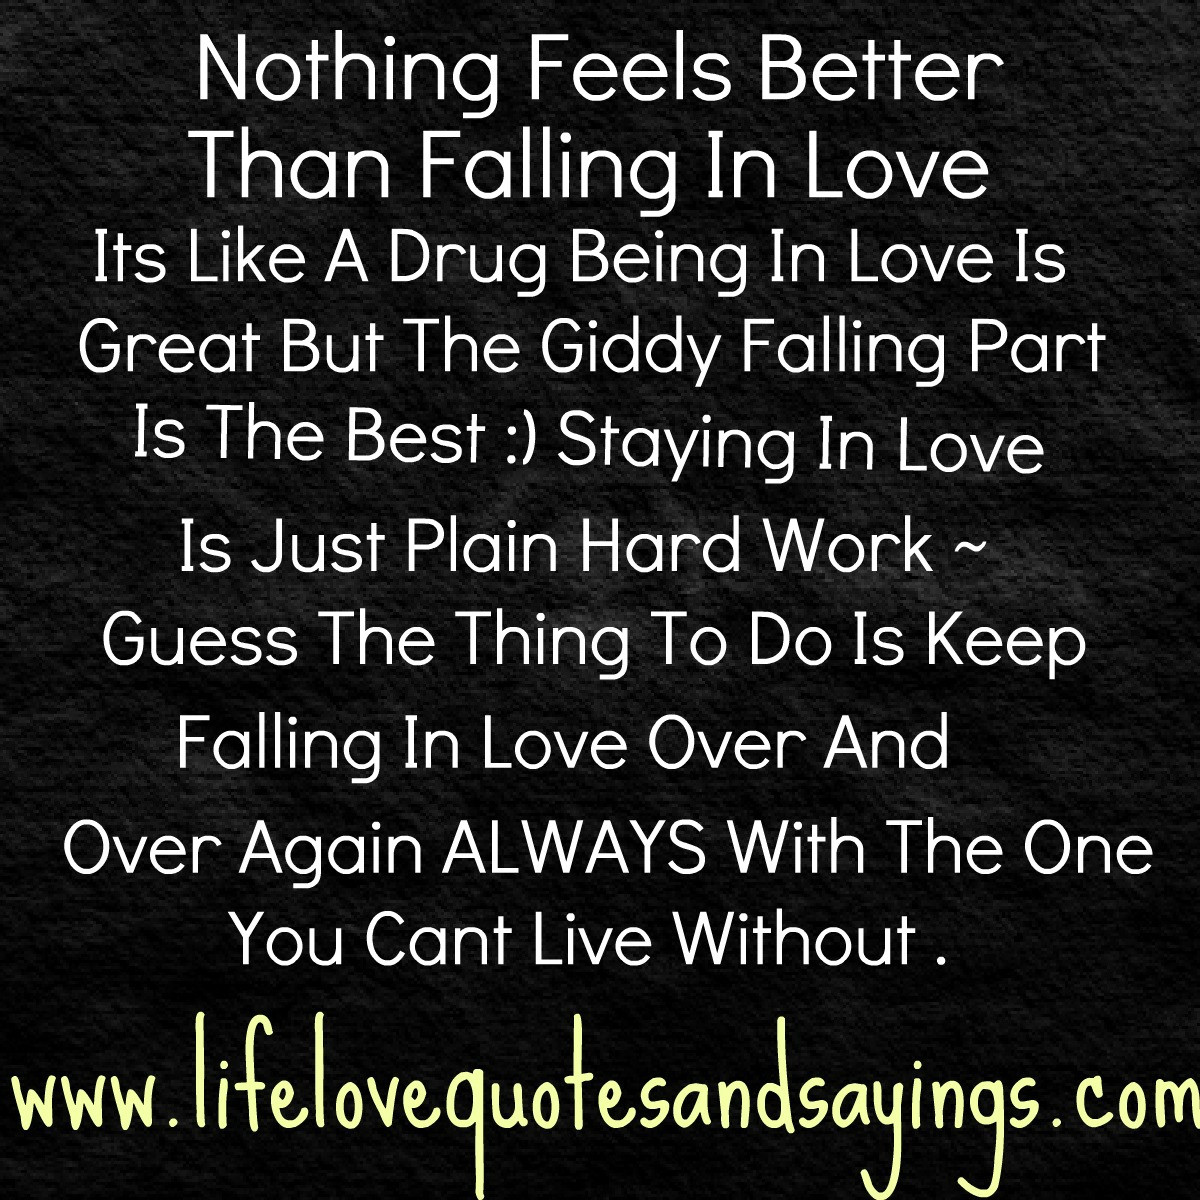 Quotes About Falling In Love
 Falling In Love Quotes For Him QuotesGram